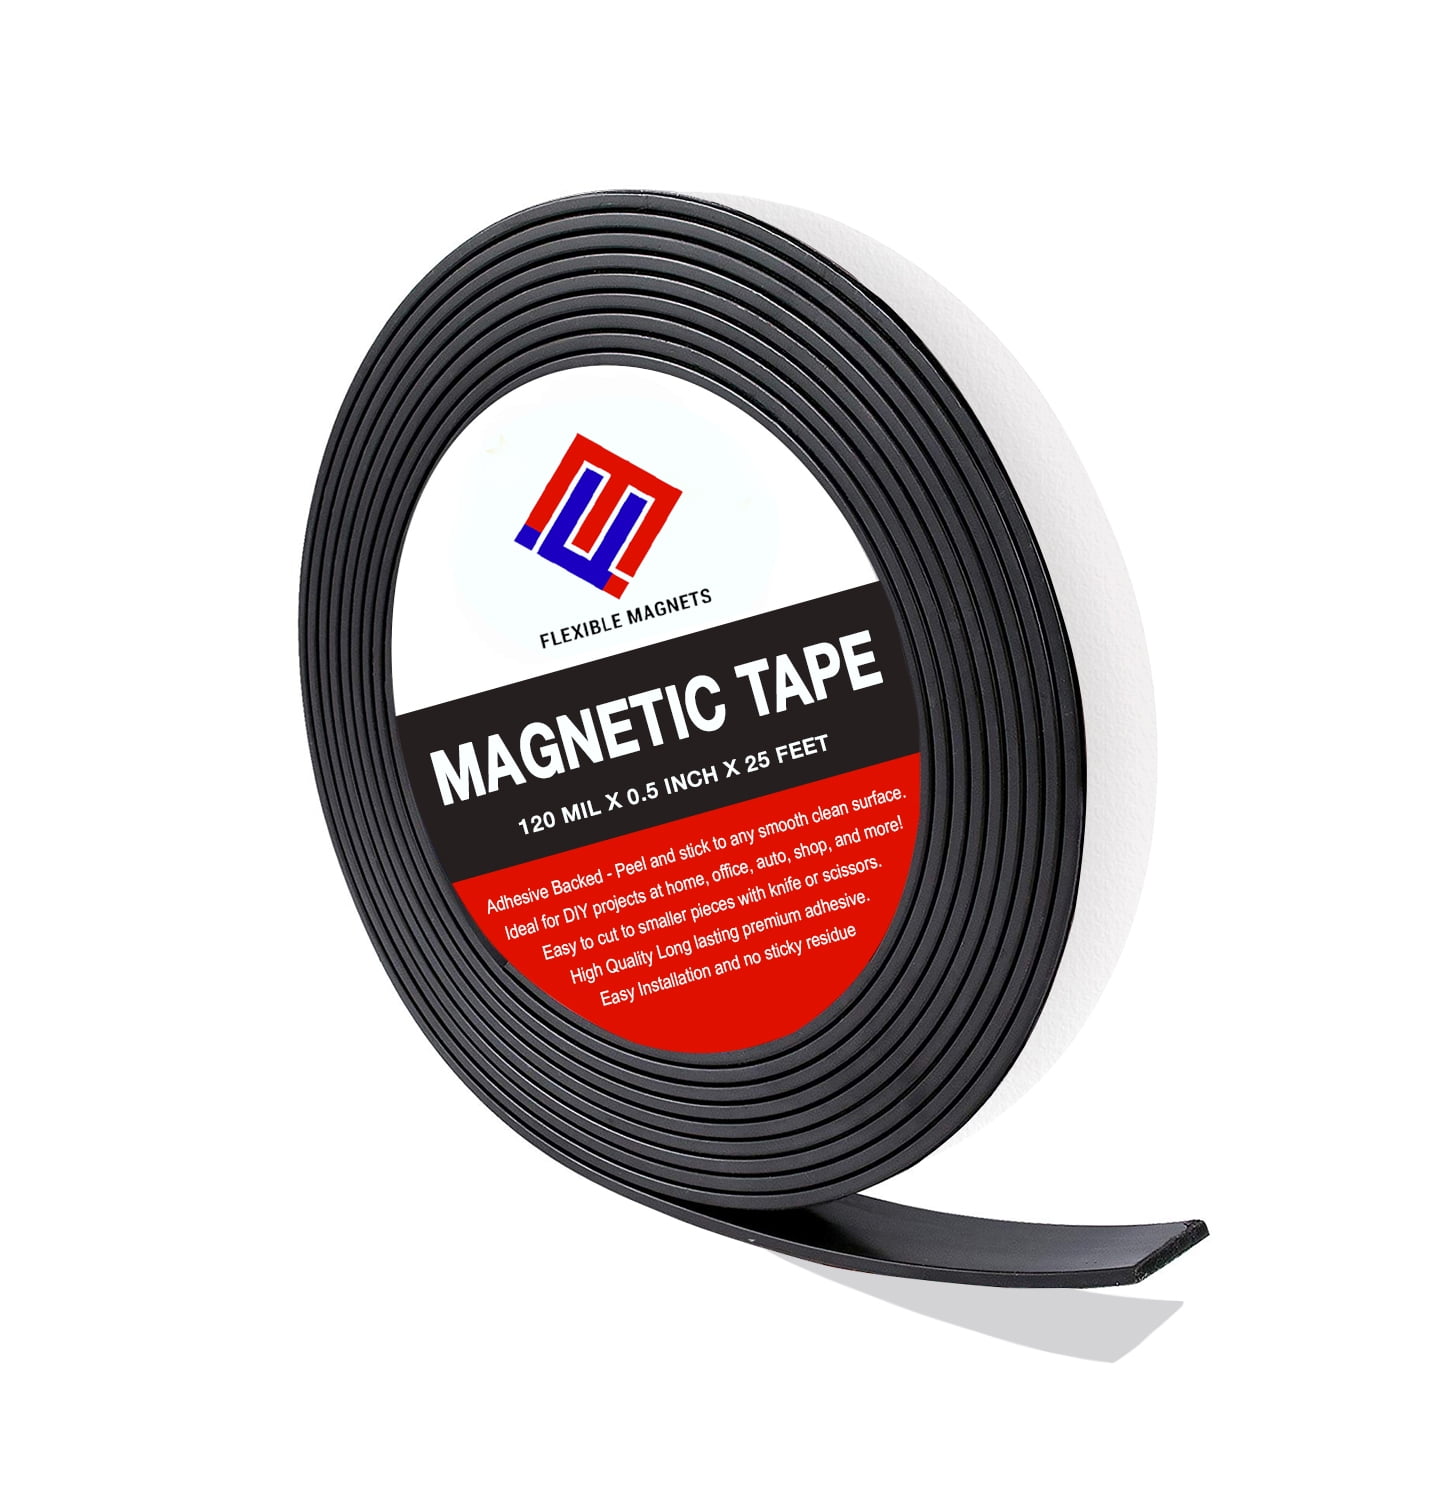 Flexible Magnet Tape Thick X 1 Feet Roll 16 Wide 2 BRAND Adhesive Magnetic Strip for sale online 